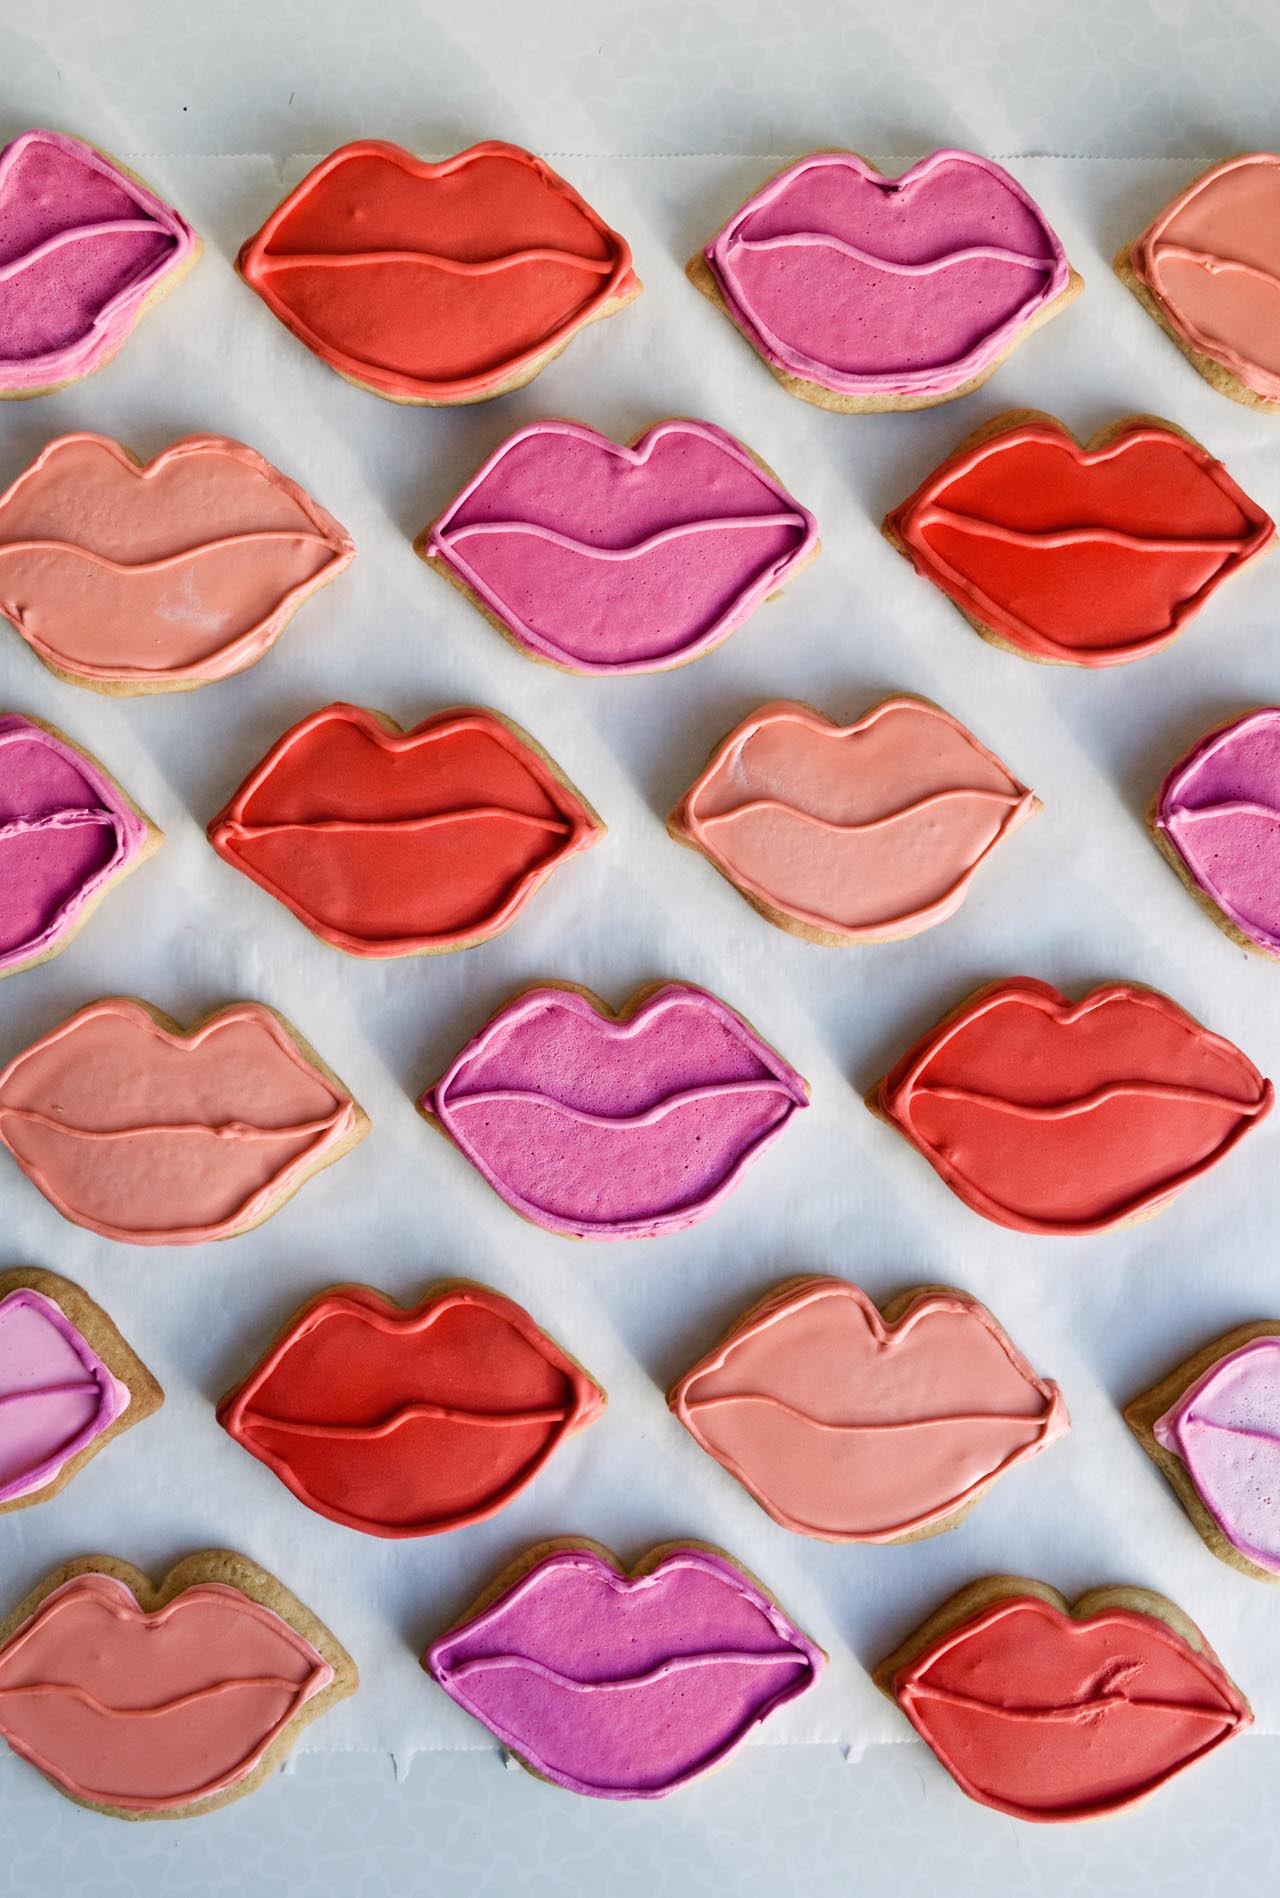 lip shaped sugar cookies - fun pretty cookies for Valentine's day or girlfriend brunch!